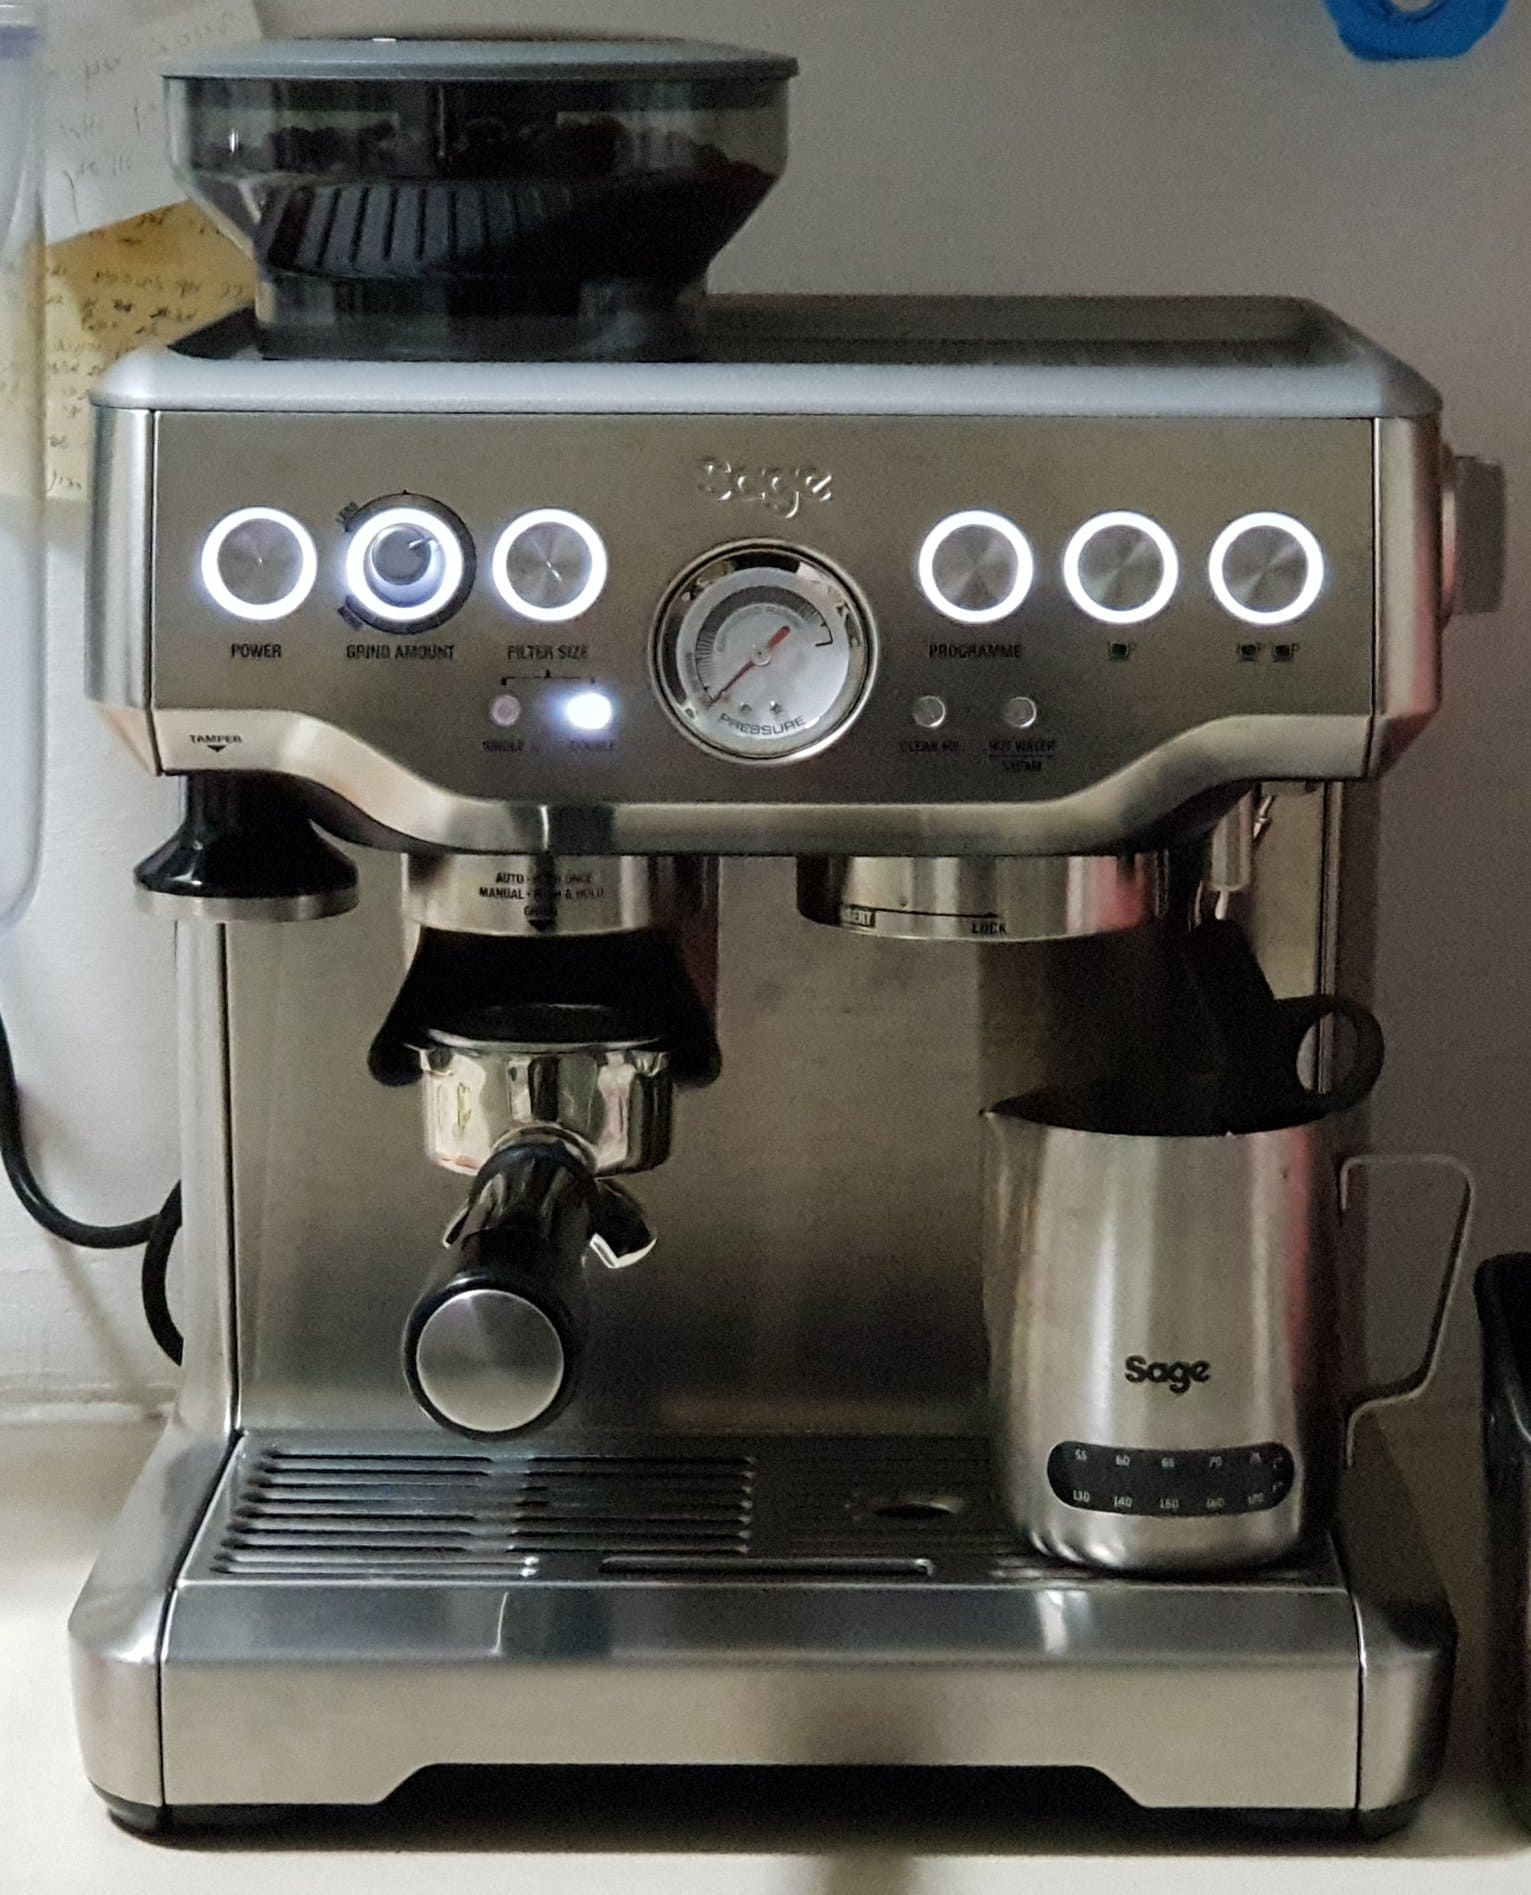 The Barista Express has programmable functions